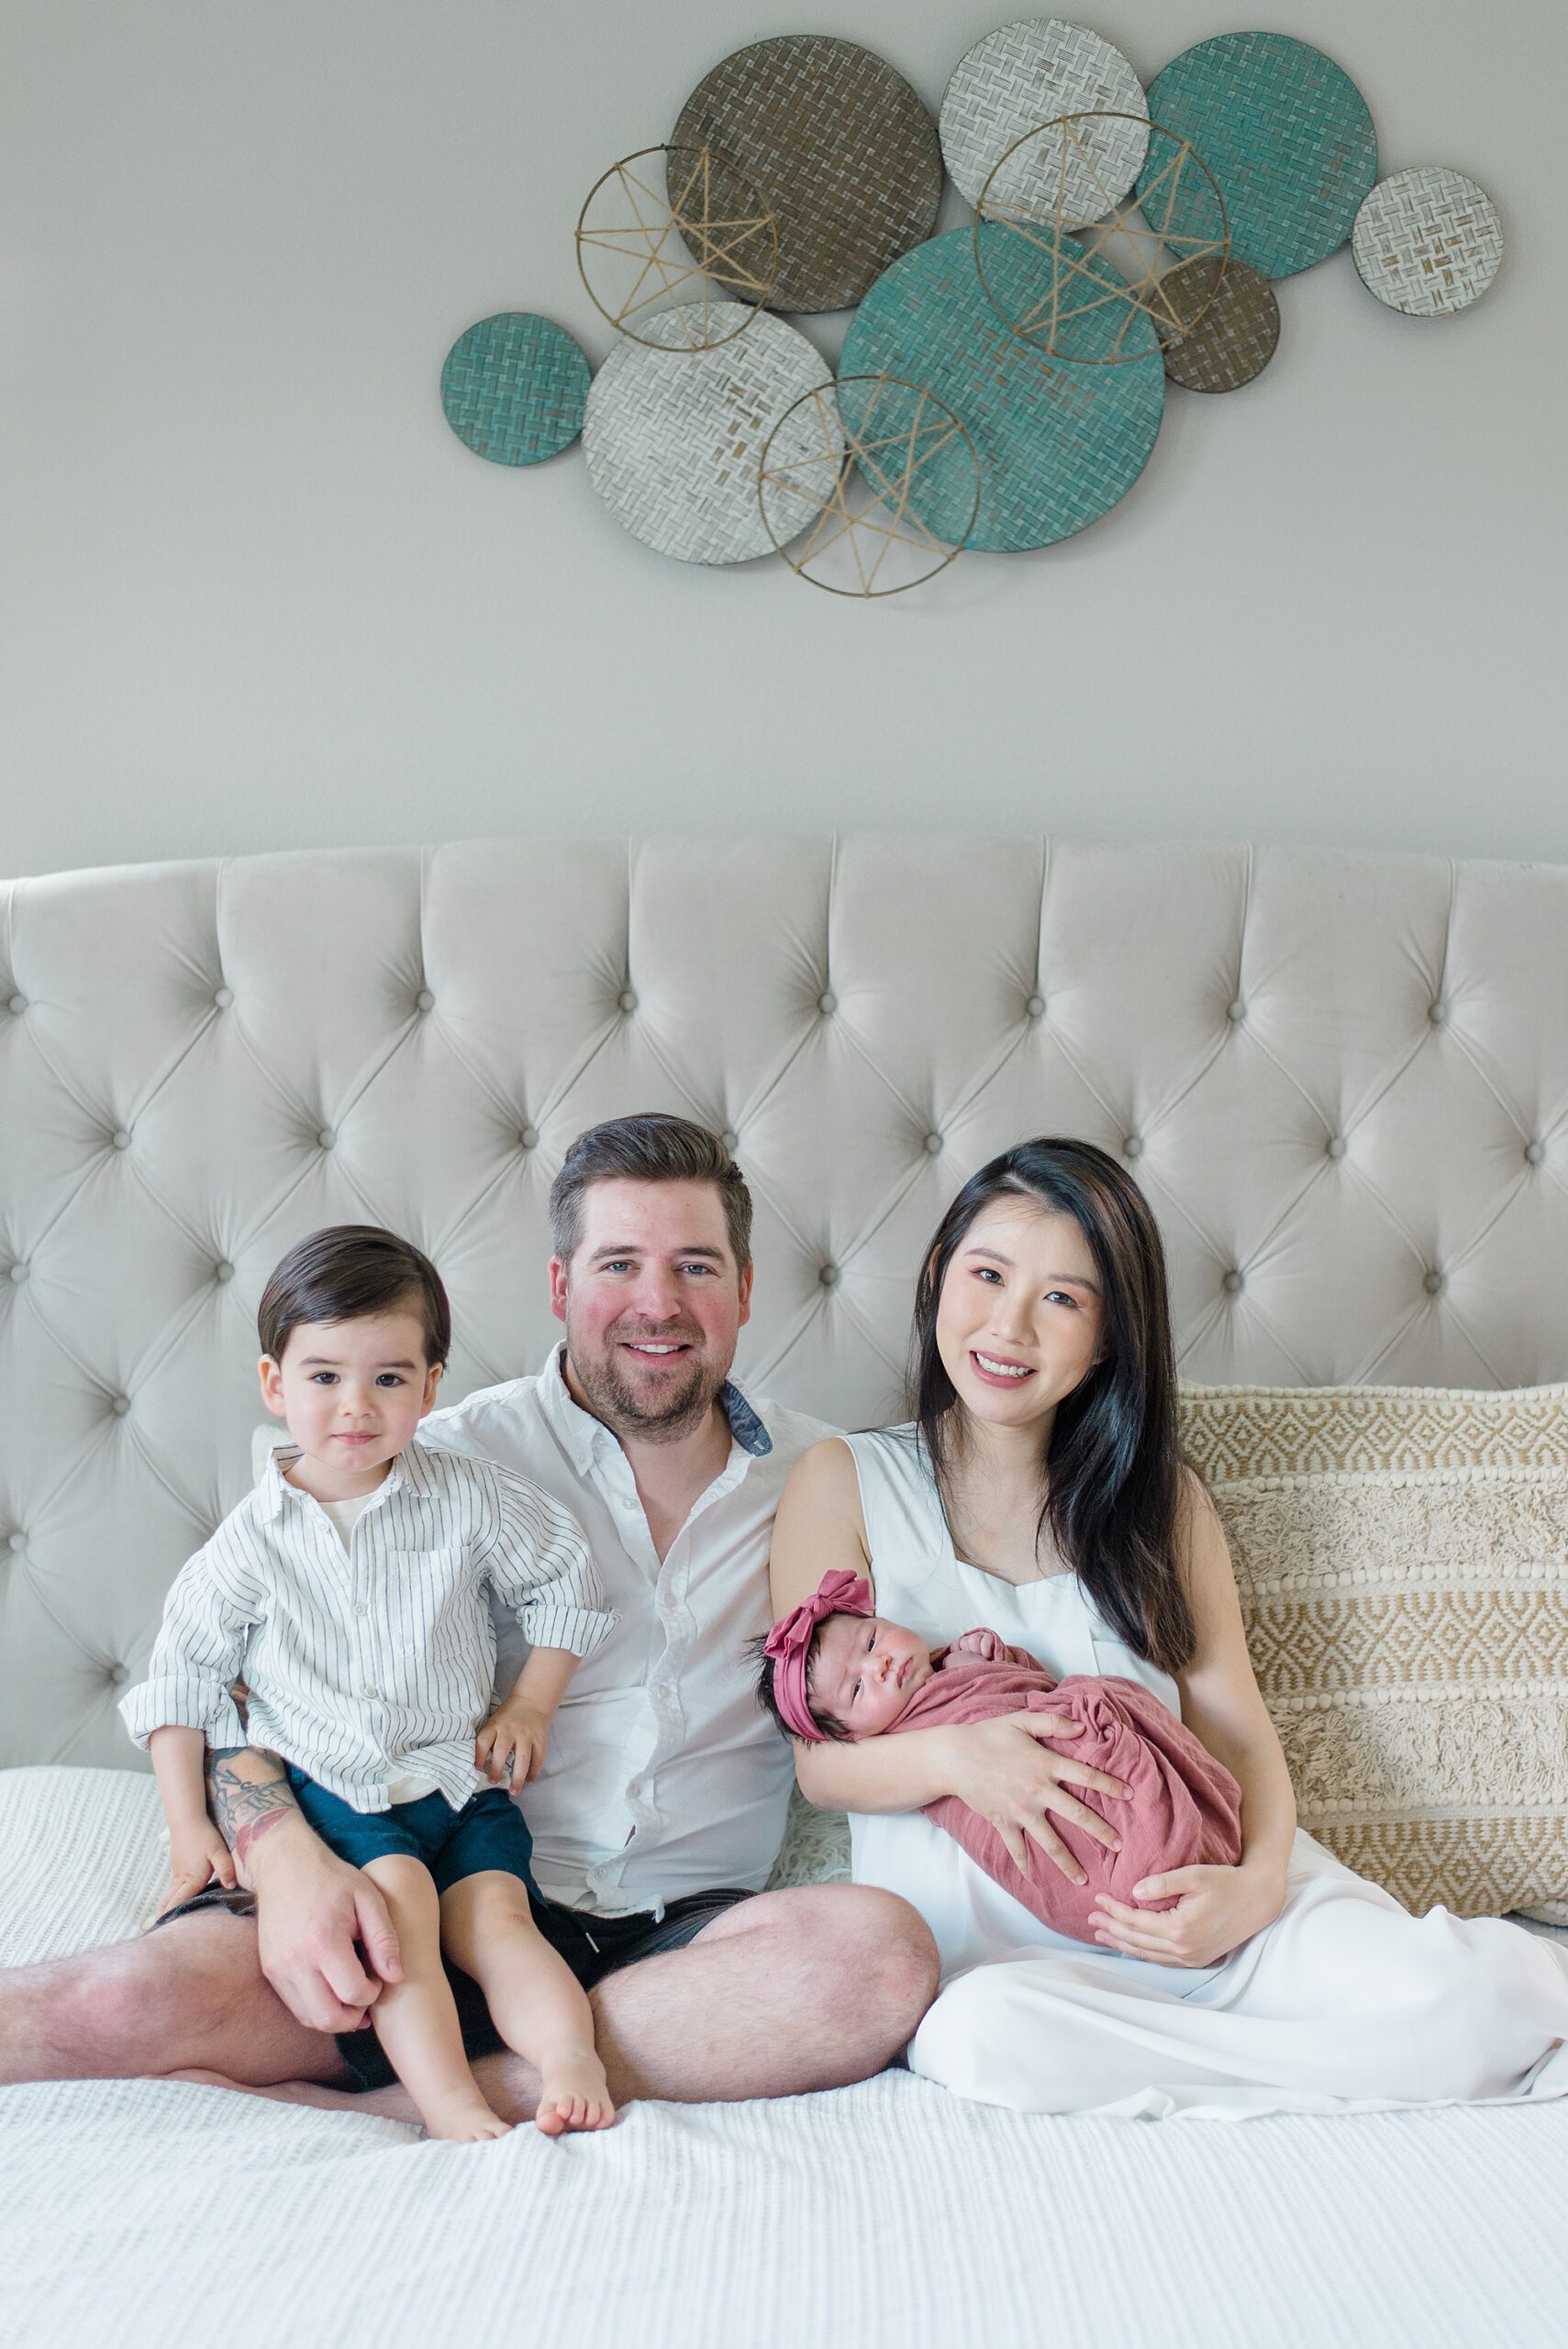 Harmony Grove family photographer captures In-Home Session of new family of four